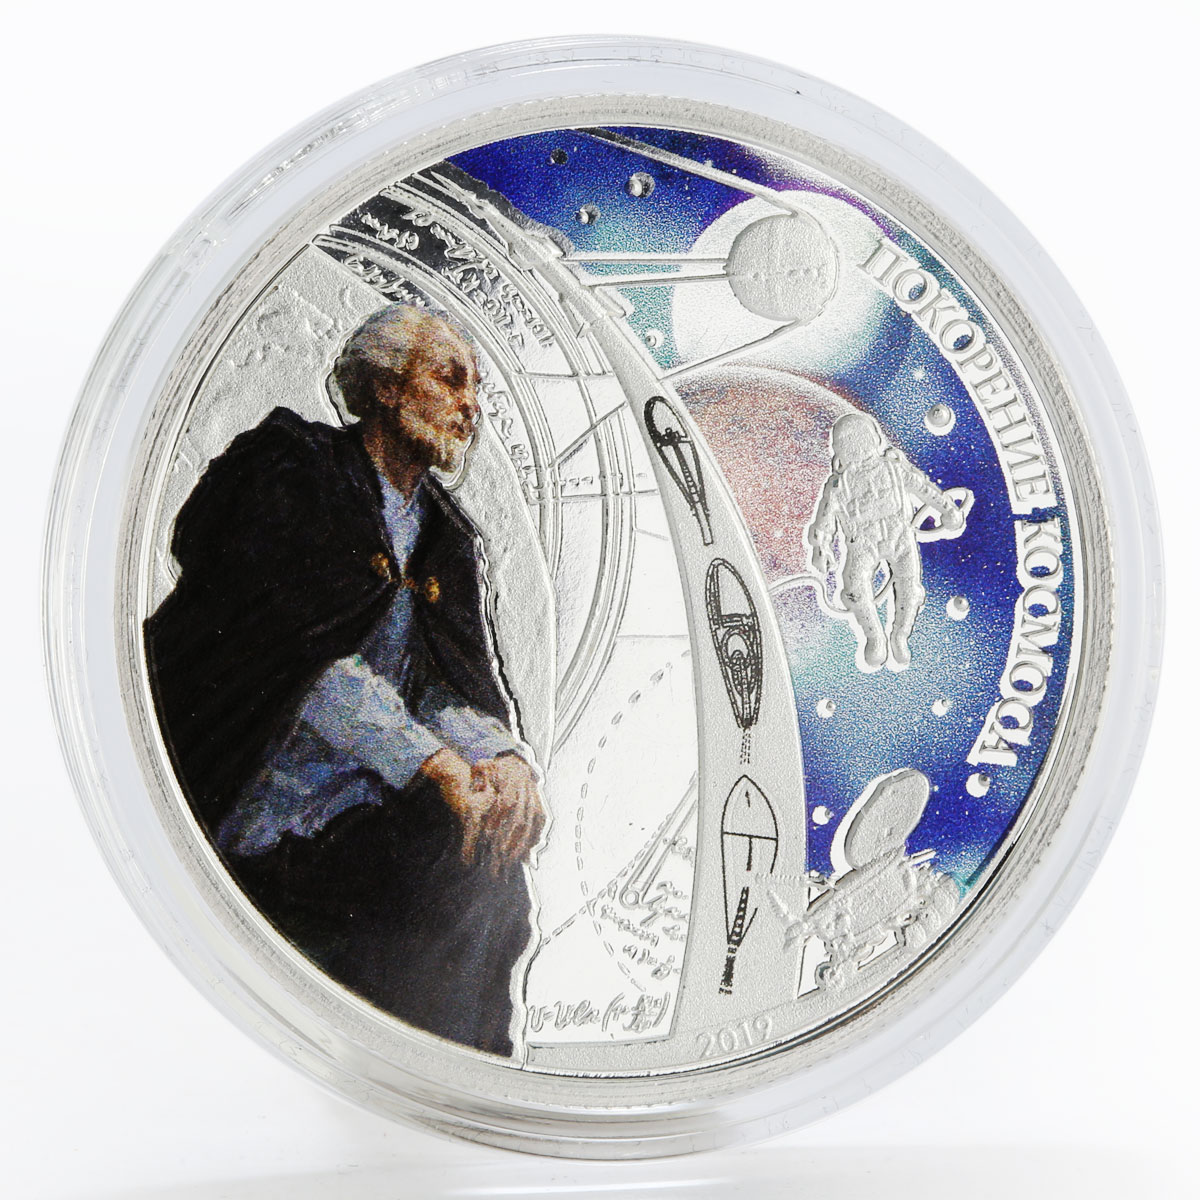 Benin 1000 francs Conquest of Space colored proof silver coin 2019